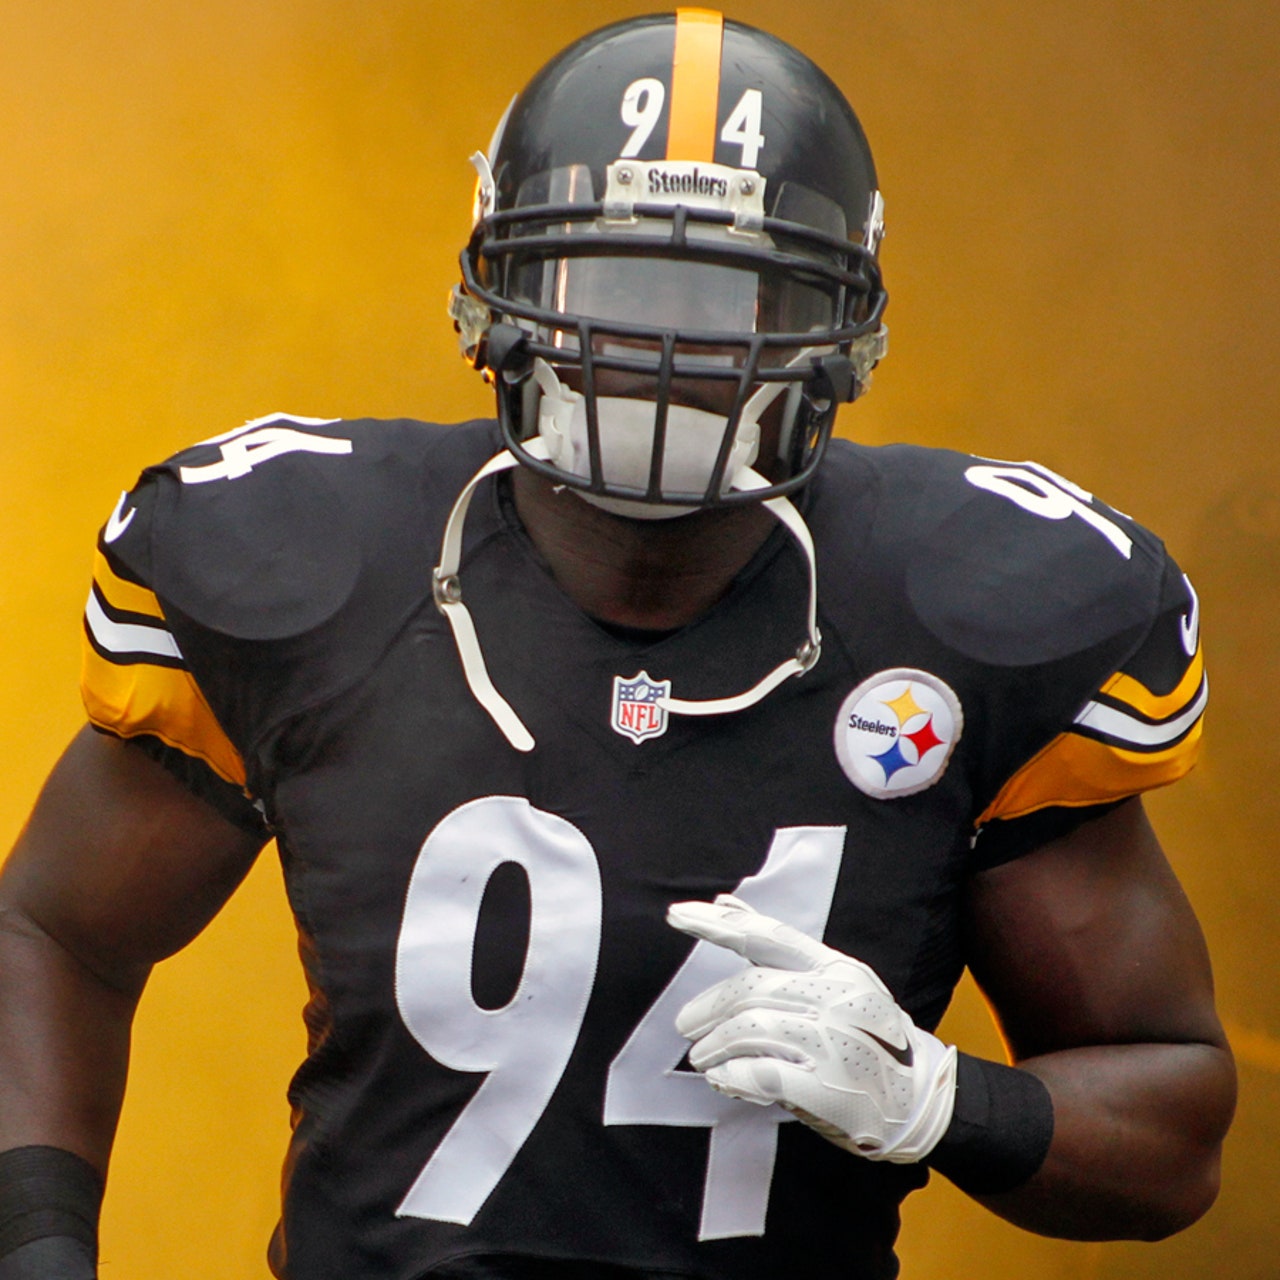 Timmons leader of young Steelers linebackers